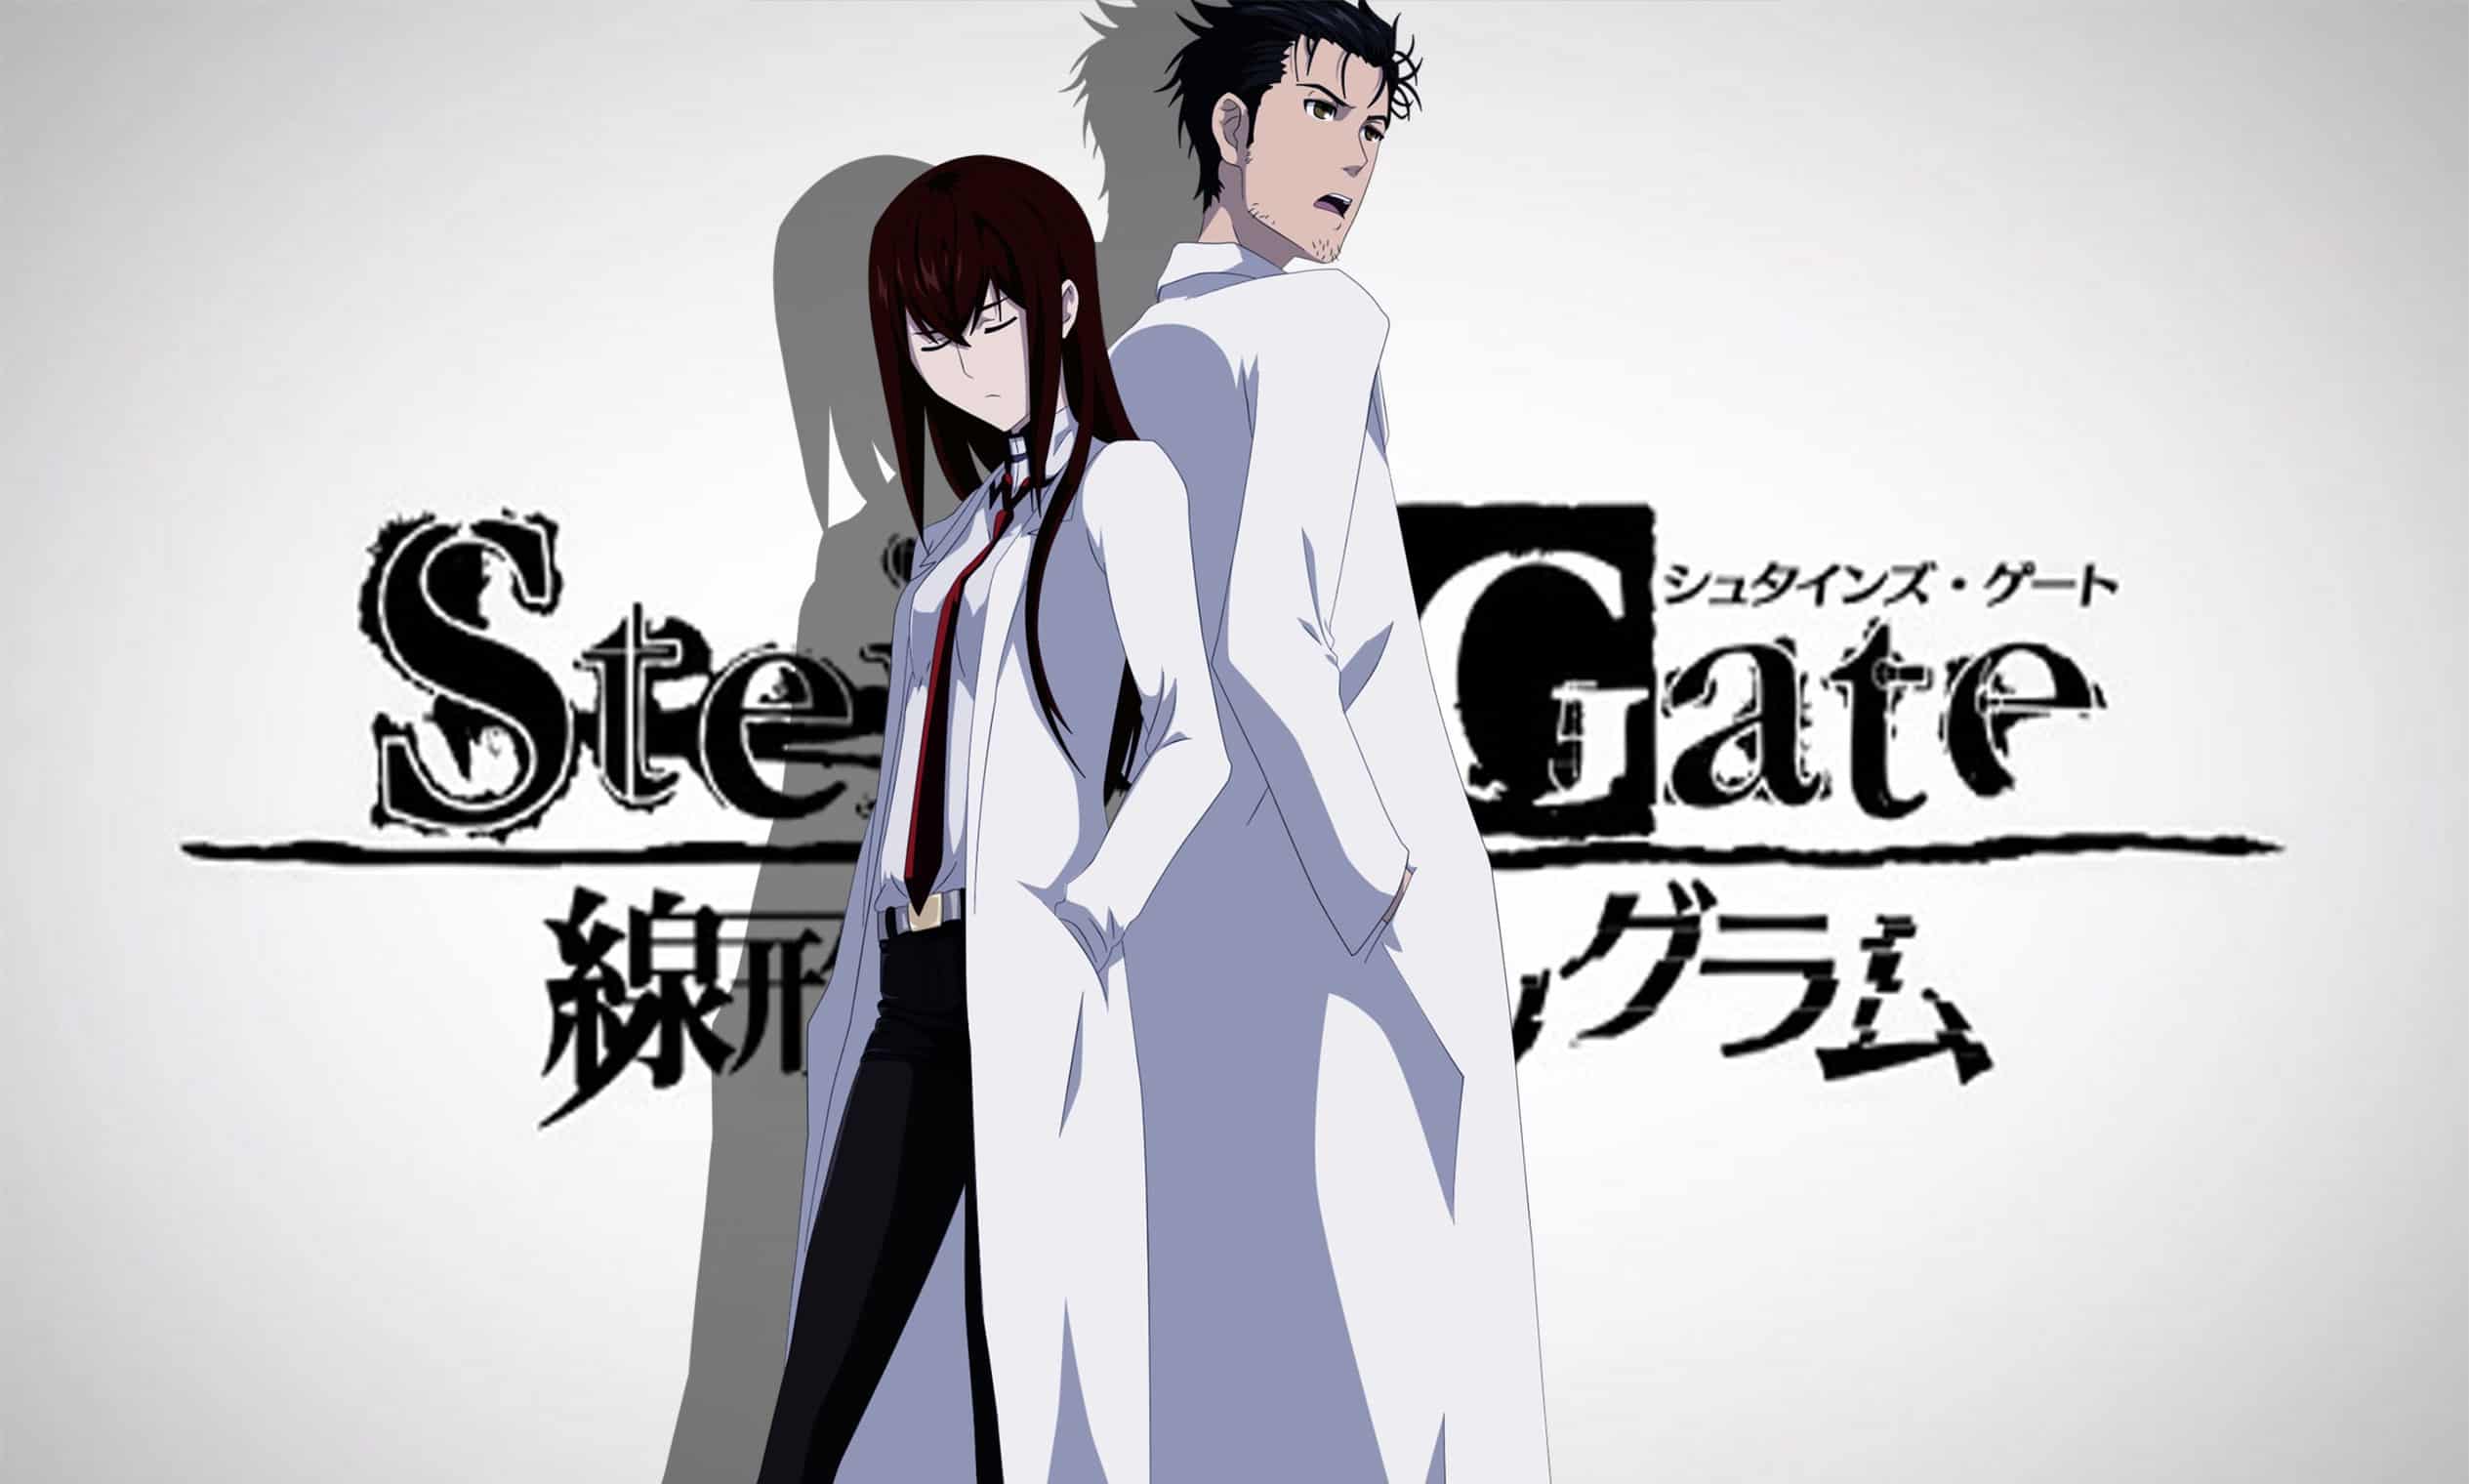 Steins;Gate timeline analysis: the best anime about time travel